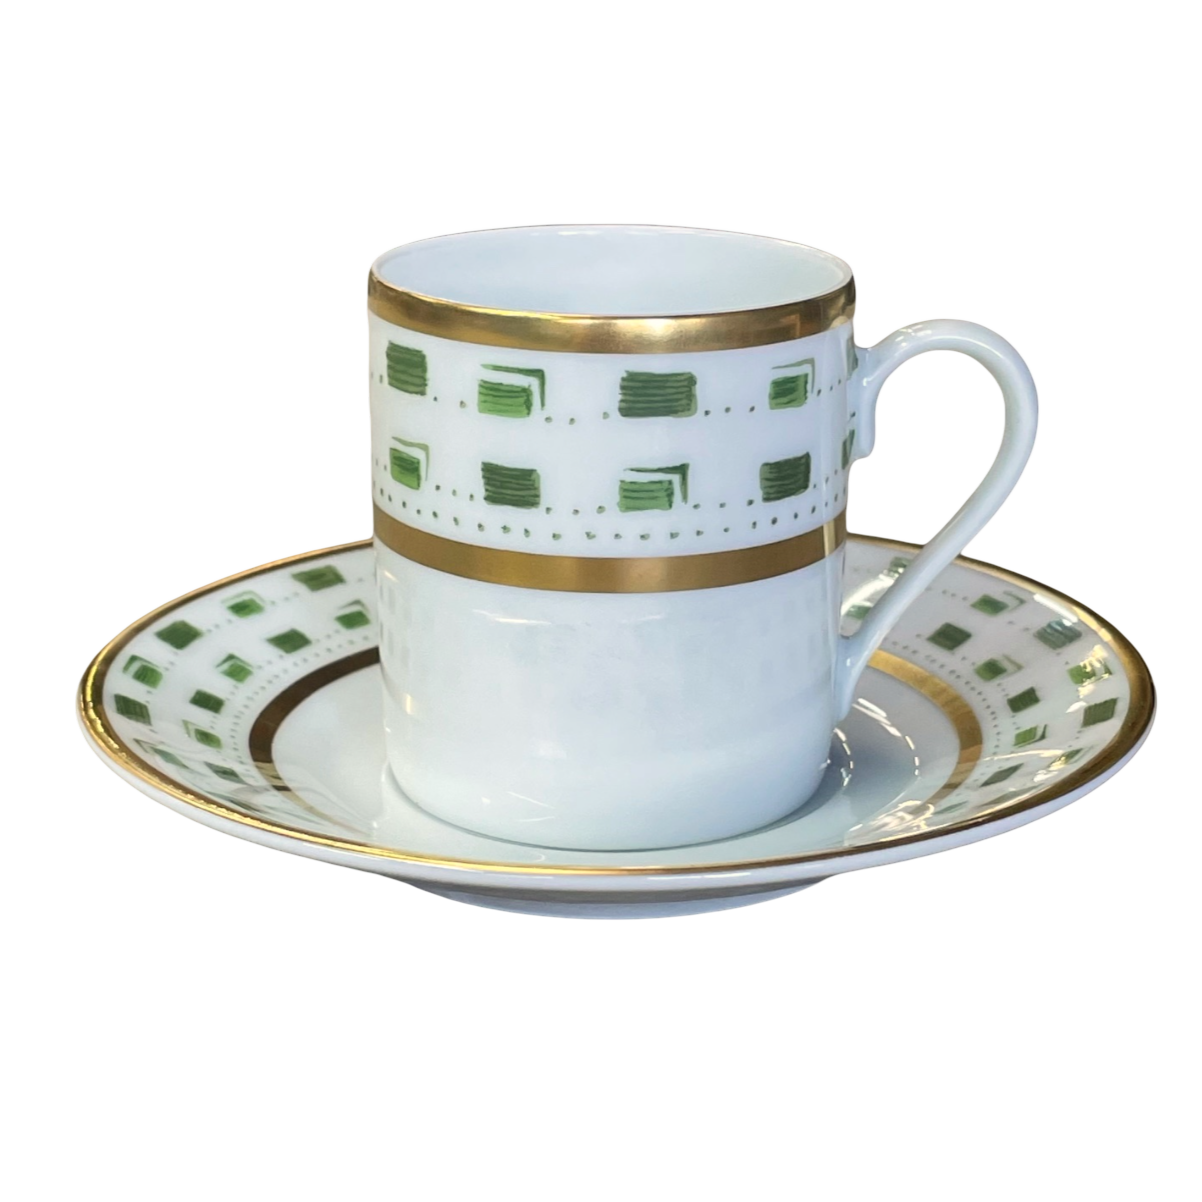 La Bocca green - Coffee cup and saucer 0.12 litre